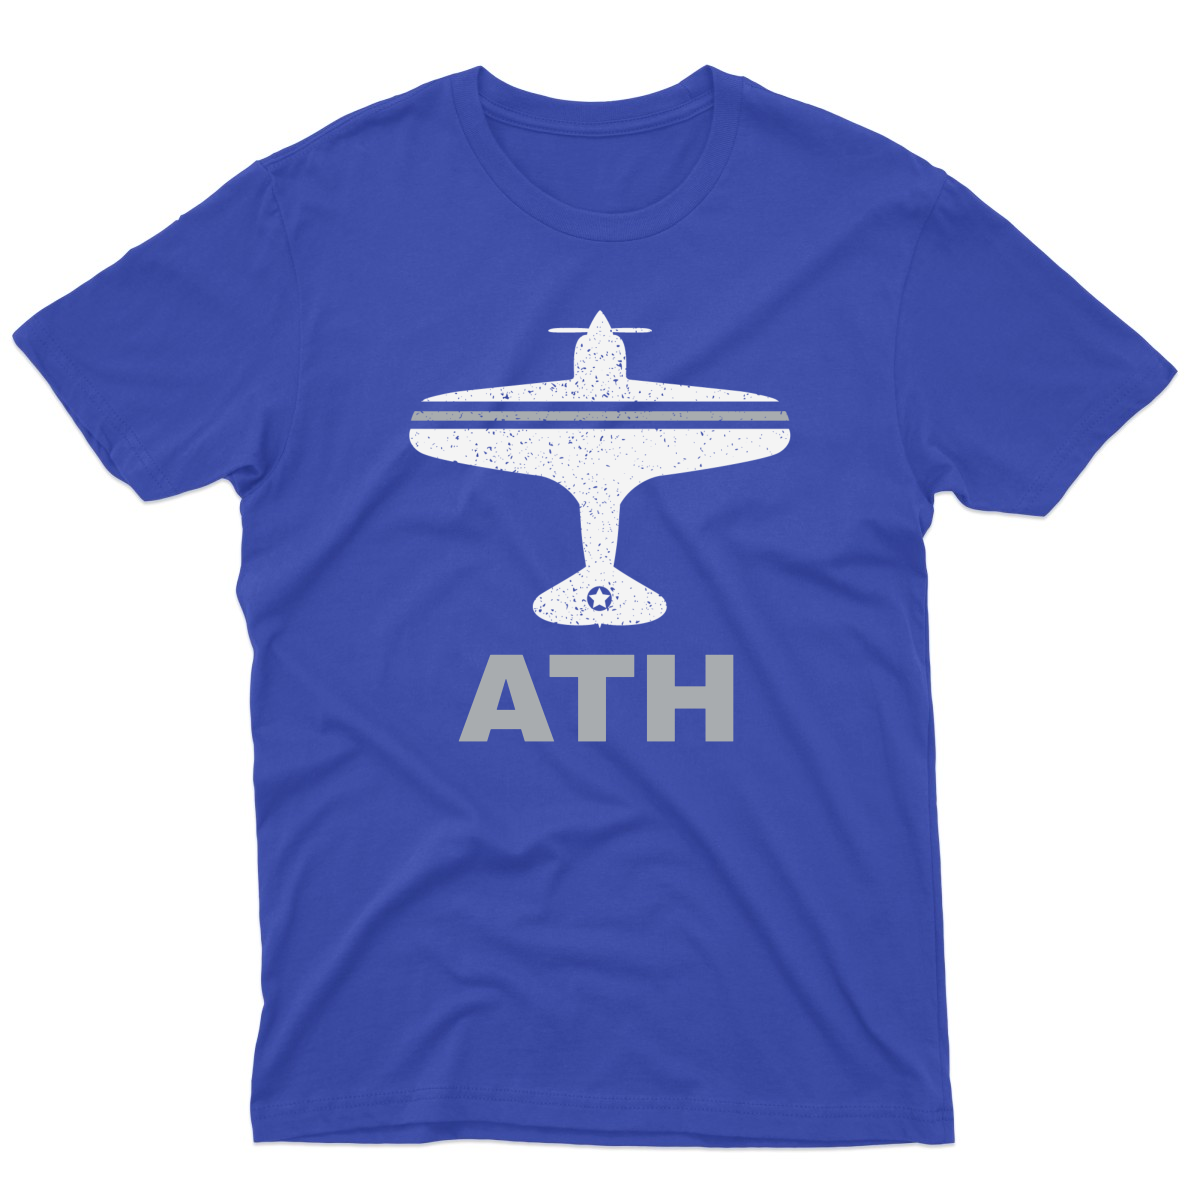 Fly Athens ATH Airport Men's T-shirt | Blue